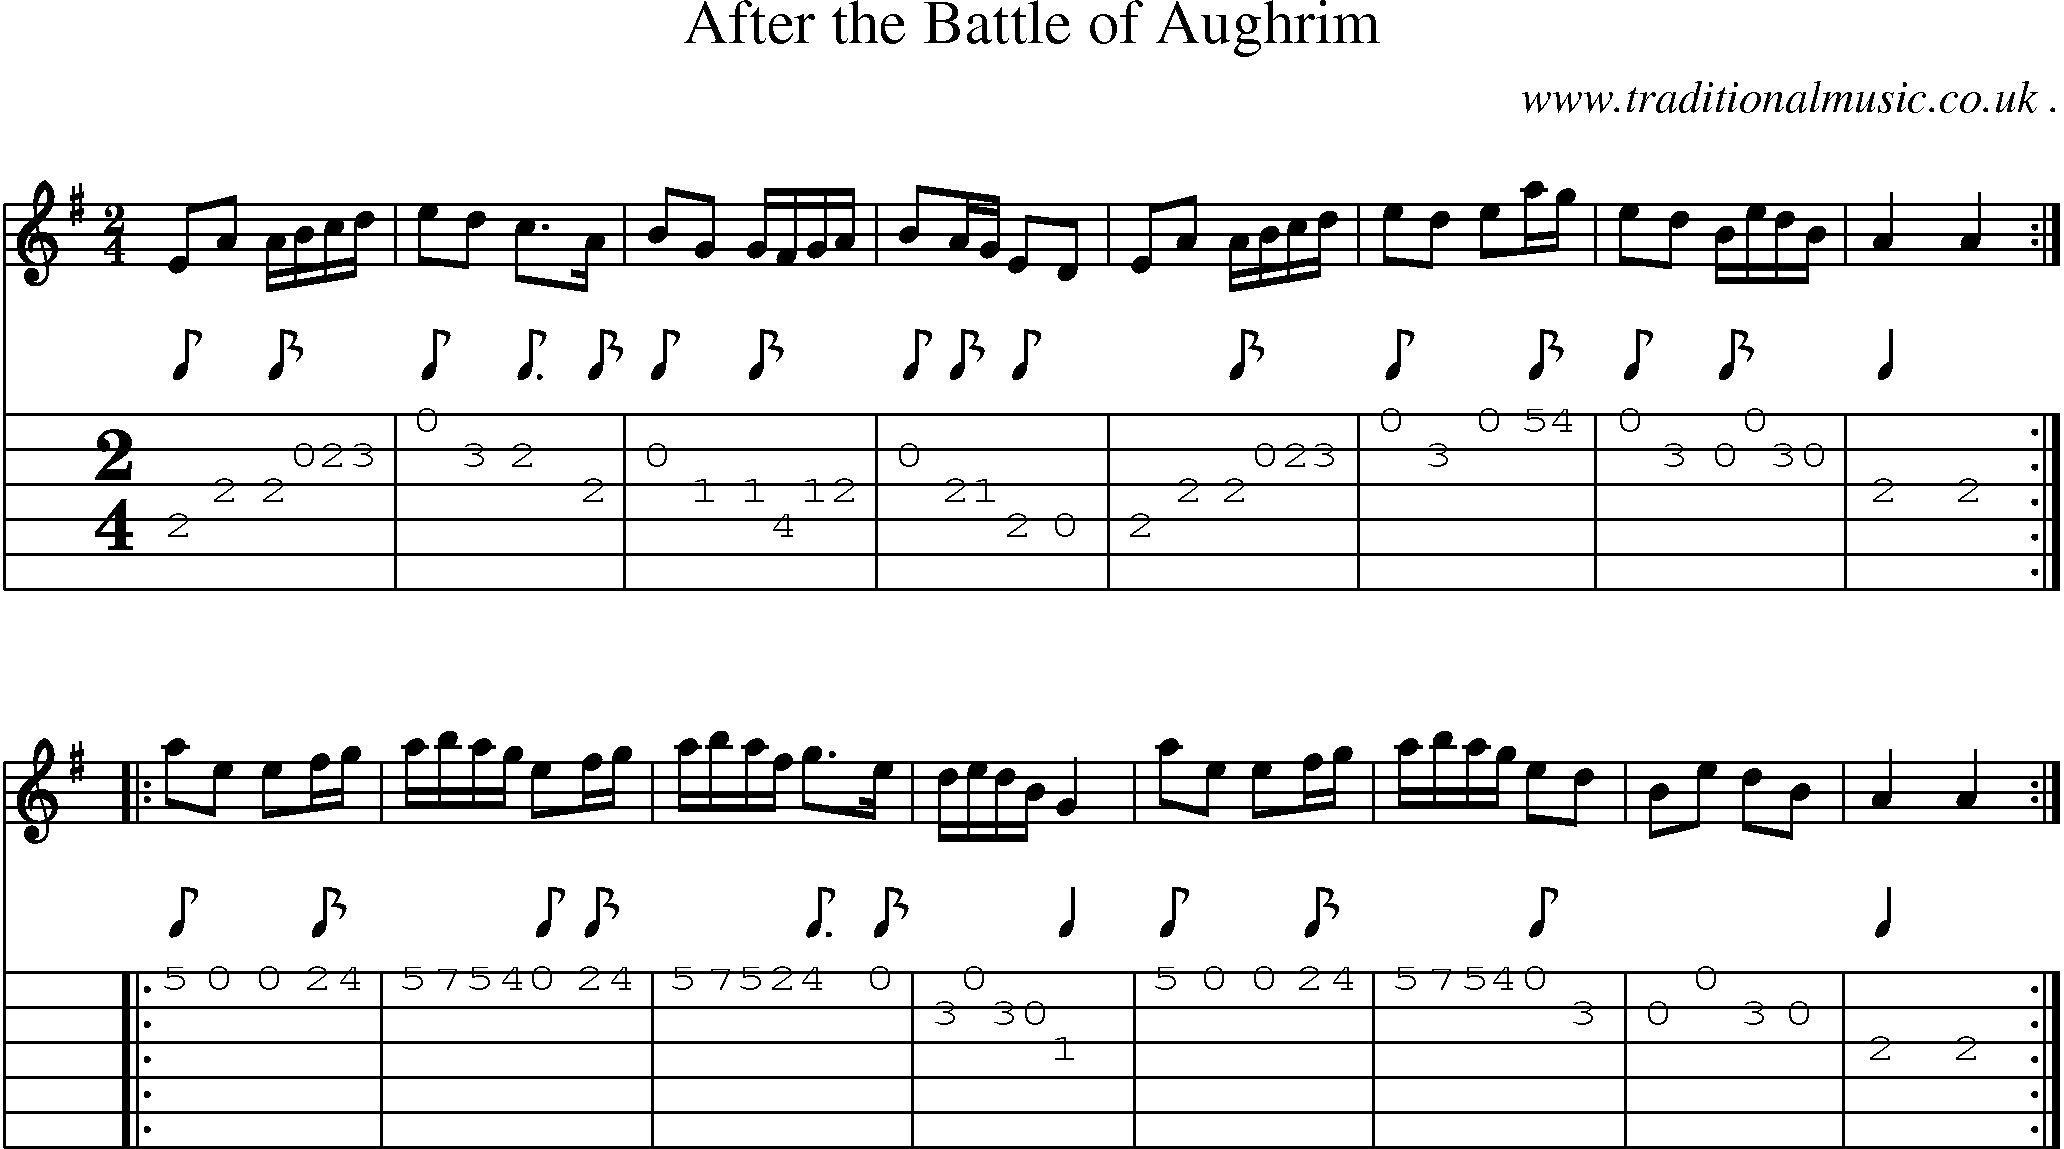 Sheet-music  score, Chords and Guitar Tabs for After The Battle Of Aughrim